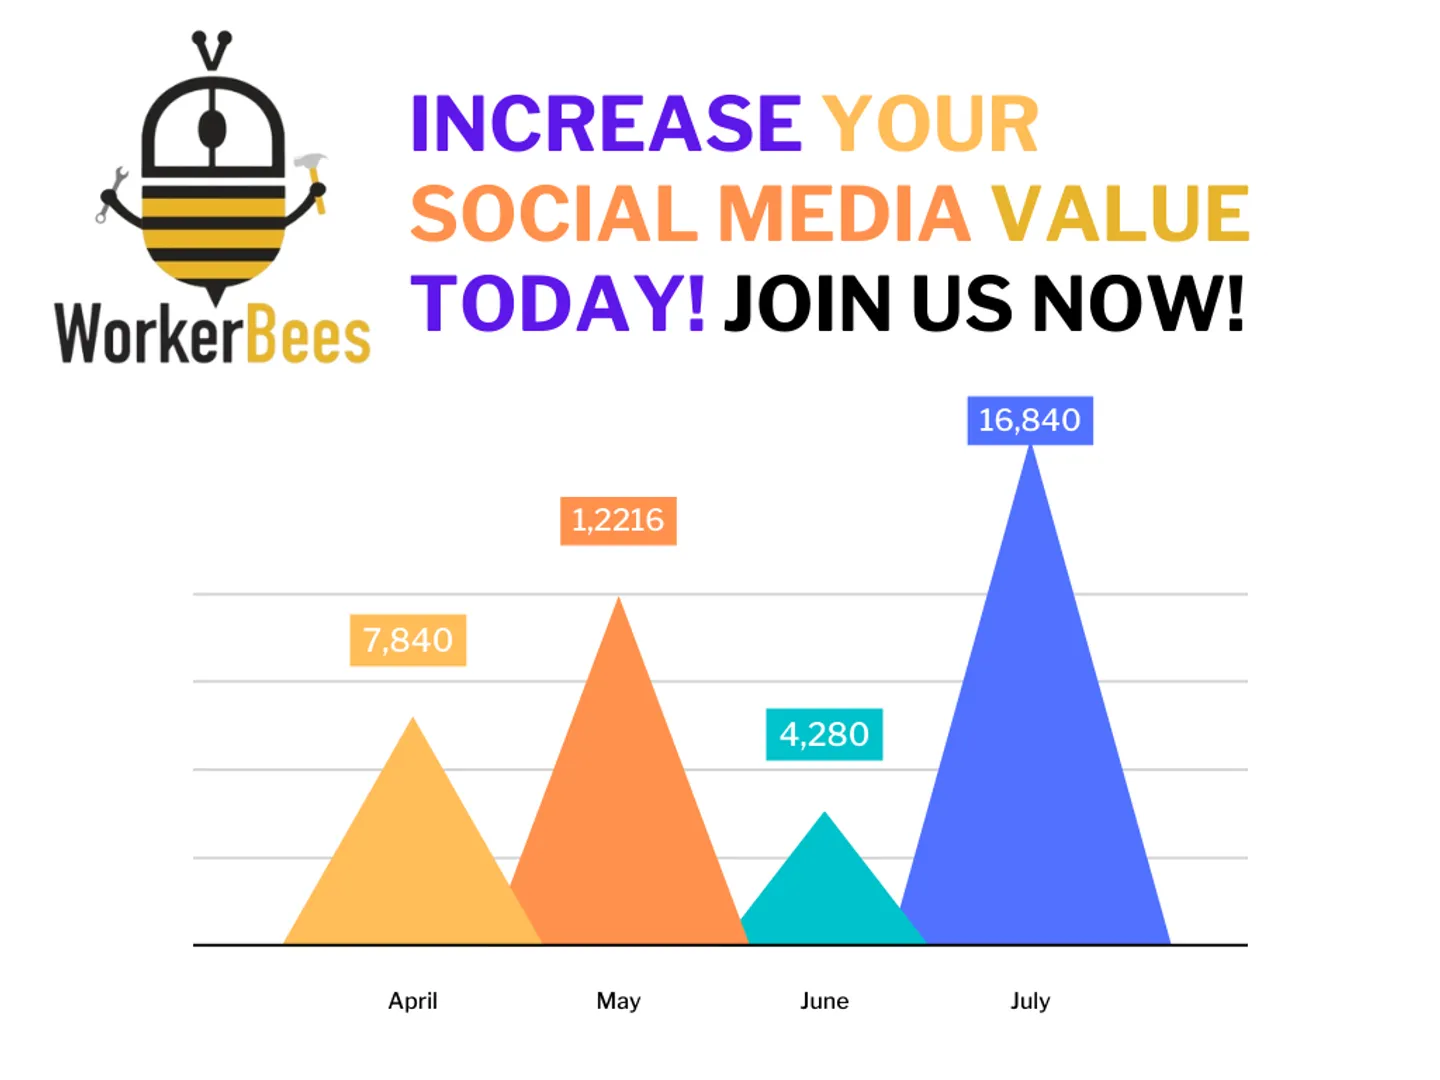 🚀 Boost Your Social Media Game on a Budget! 📈✨

Are you ready to take your social media presence to the next level? 🌟 It's time to skyrocket your value, expand your audience, and amp up that engagement – all without breaking the bank! 💰💬

🎯 Targeted Growth: Our affordable strategies ensure you're reaching the right people. Quality over quantity, always! 🎯

👥 Audience Expansion: Watch your follower count soar as we connect you with users who resonate with your content. Real connections, real growth. 👤👤👤

💬 Engage like Never Before: Spark meaningful conversations with your audience. Our proven methods will have your comments section buzzing! 💬🗨️💬

💡 Budget-Friendly Brilliance: No need to drain your wallet. We believe in effective strategies that won't break the bank. Your success is our priority! 💡💸

Ready to witness the transformation? Let's make your social media shine brighter than ever before. ✨📲 

Join us now: https://digitalworkerbees.com/?refId=WB0000319

#socialmedia #marketing #socialmediamarketing #digitalmarketing #instagram #branding #business #marketingdigital #seo #design #entrepreneur #graphicdesign #contentmarketing #advertising #onlinemarketing #facebook #smallbusiness #marketingstrategy #webdesign #like #love #instagood #marketingtips #photography #follow #socialmediamanager #digitalworkerbees